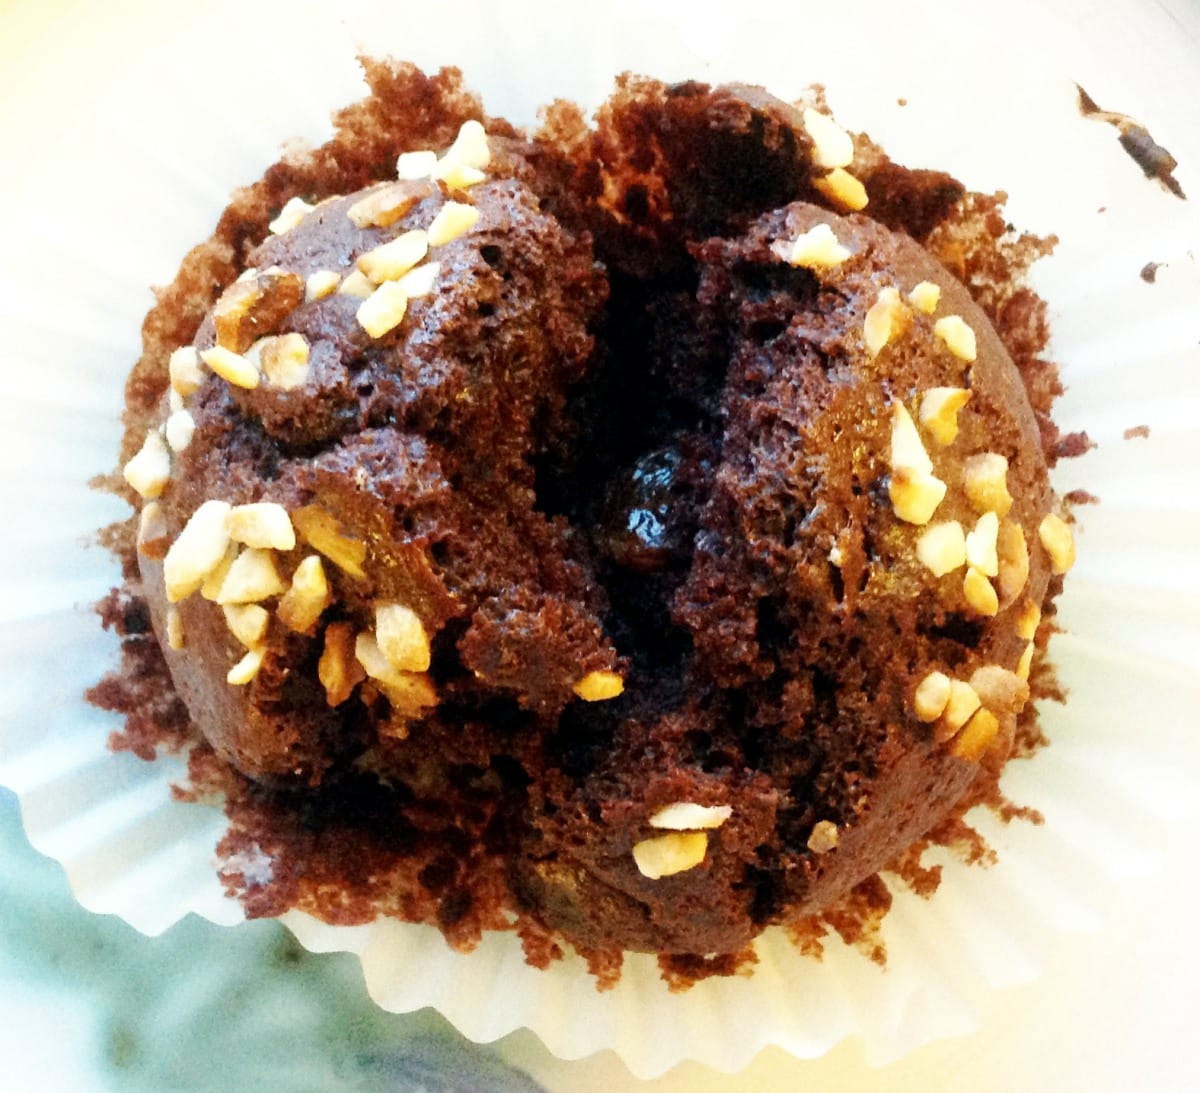 chocolate, coconut, raisin and nut muffins